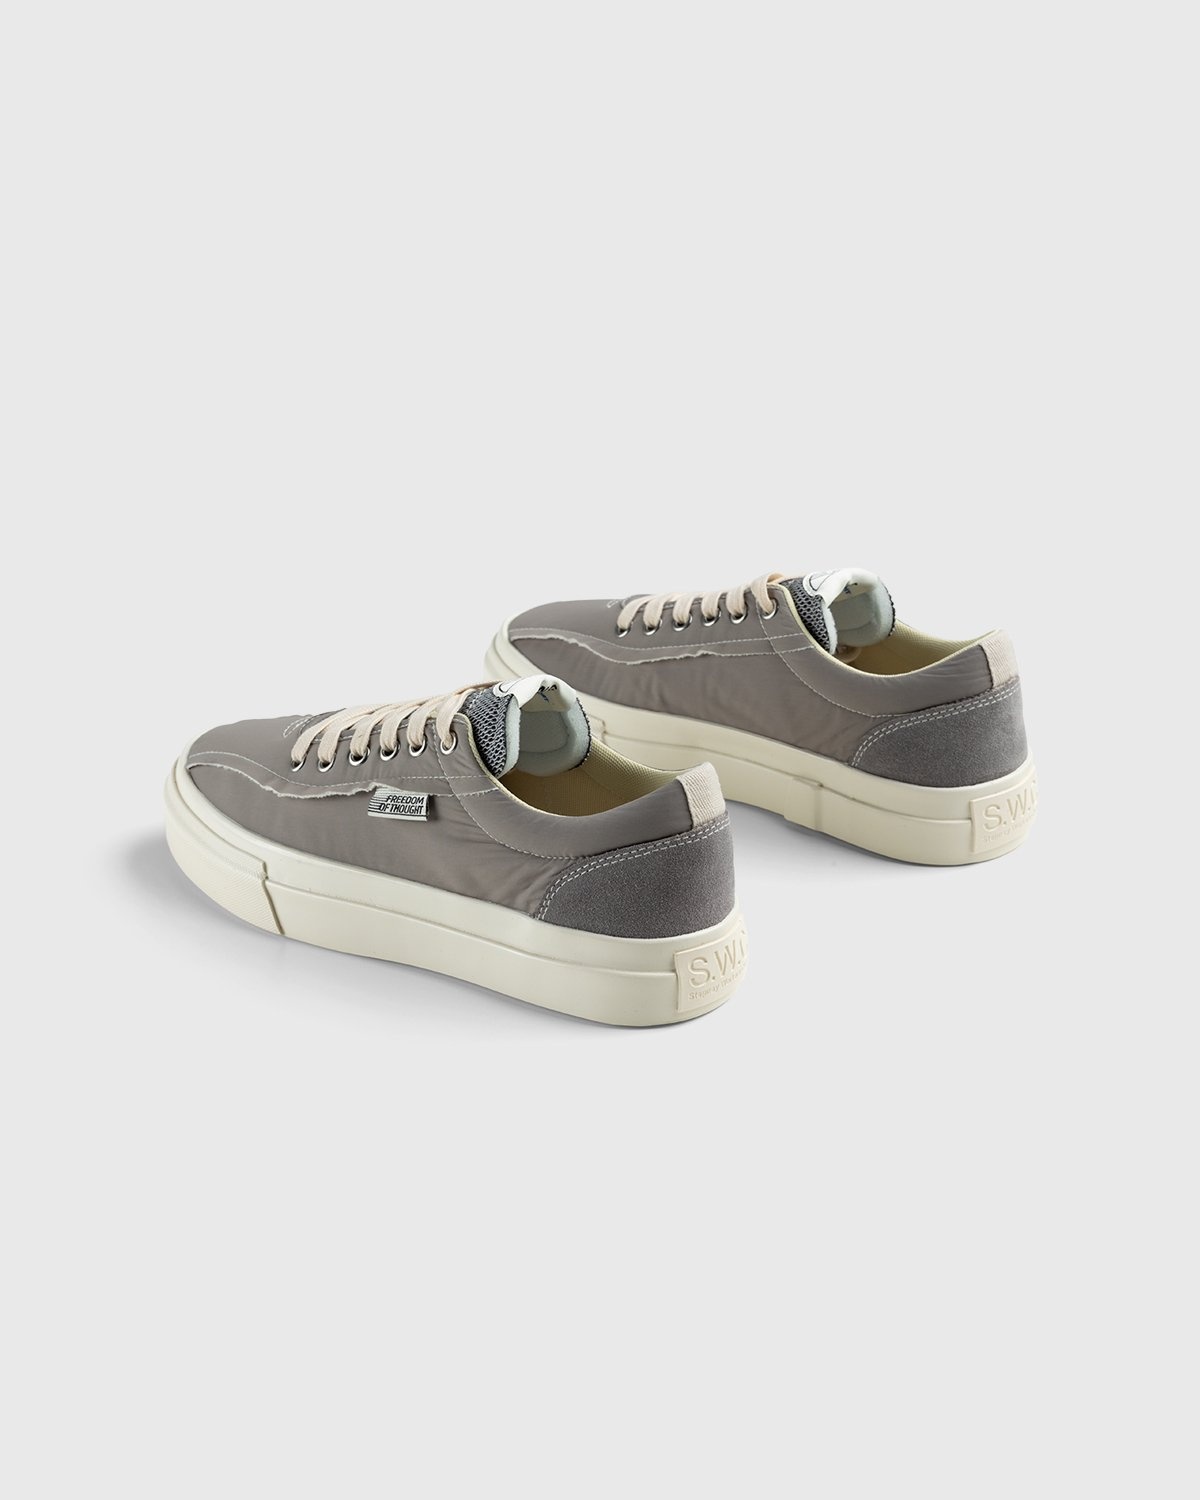 Stepney Workers Club – Dellow Track Raw Nylon Grey - Low Top Sneakers - Grey - Image 4